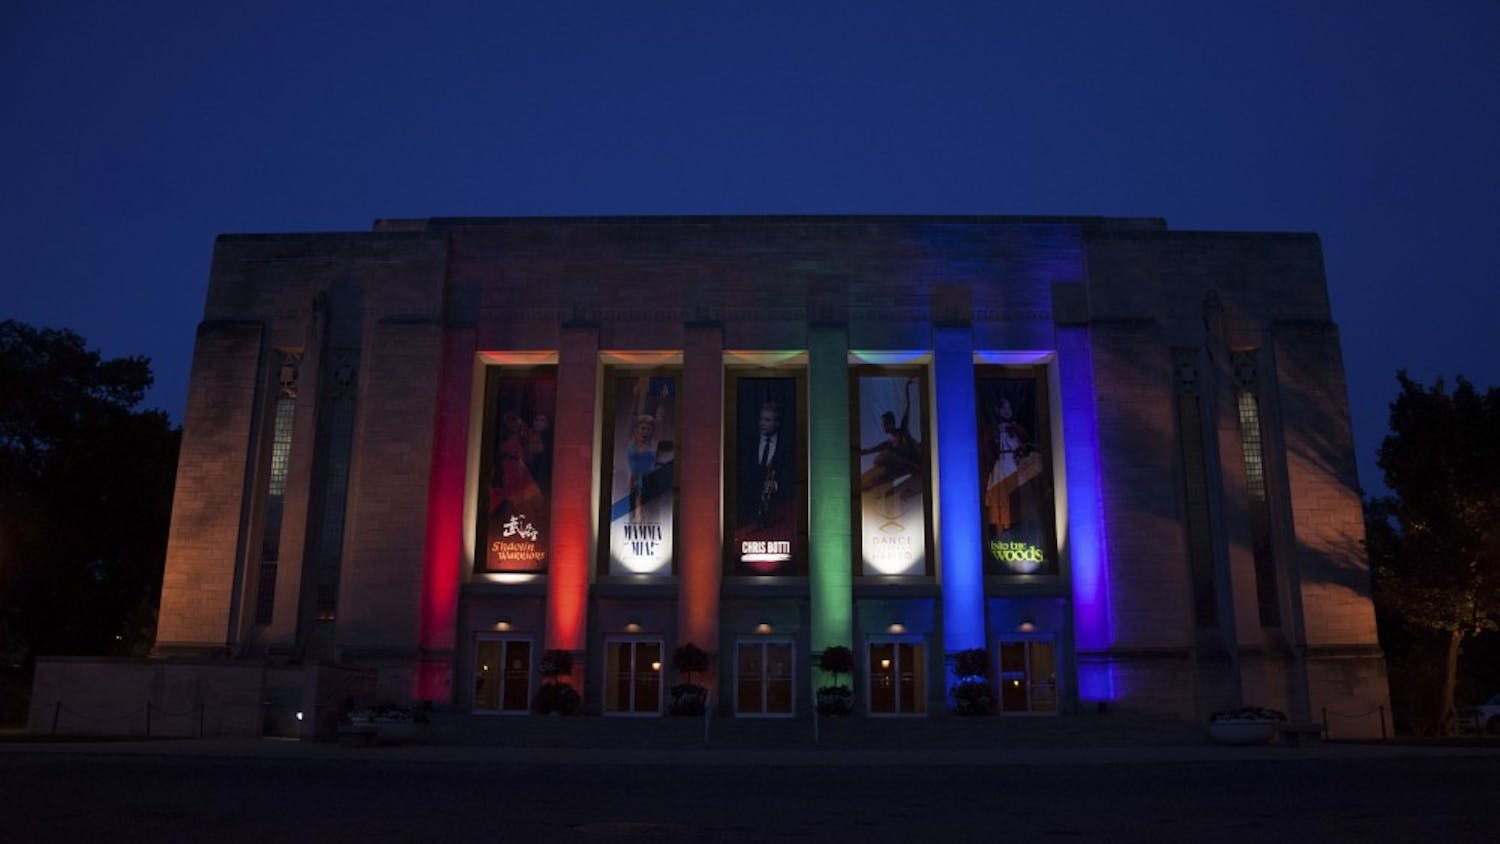 The Indiana University Auditorium lights up in Pride colors as a memorial for the Orlando mass shooting victims on Monday evening.
